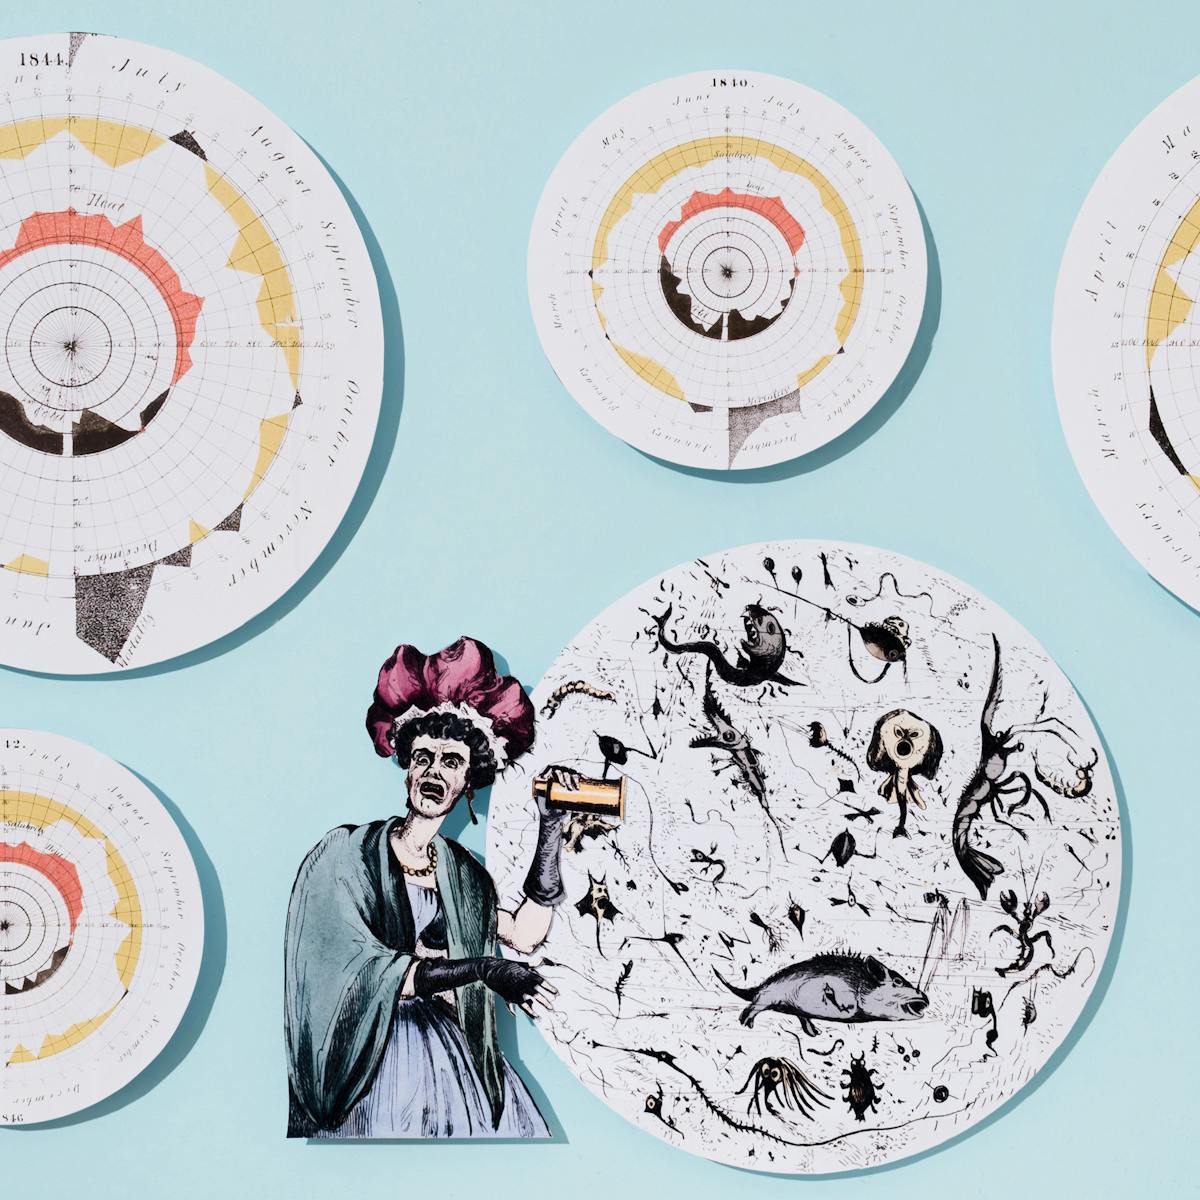 Photograph of cut out pieces of archive material from above, all raised slightly above a flat light blue background. One of the illustrations shows a shocked woman looking at enlarged microscope illustration of caricatured microbes found the dirty water causing a cholera outbreak. Surrounding the woman is a series of circular illustrations showing infection rates of the cholera outbreak during different years starting in 1840.